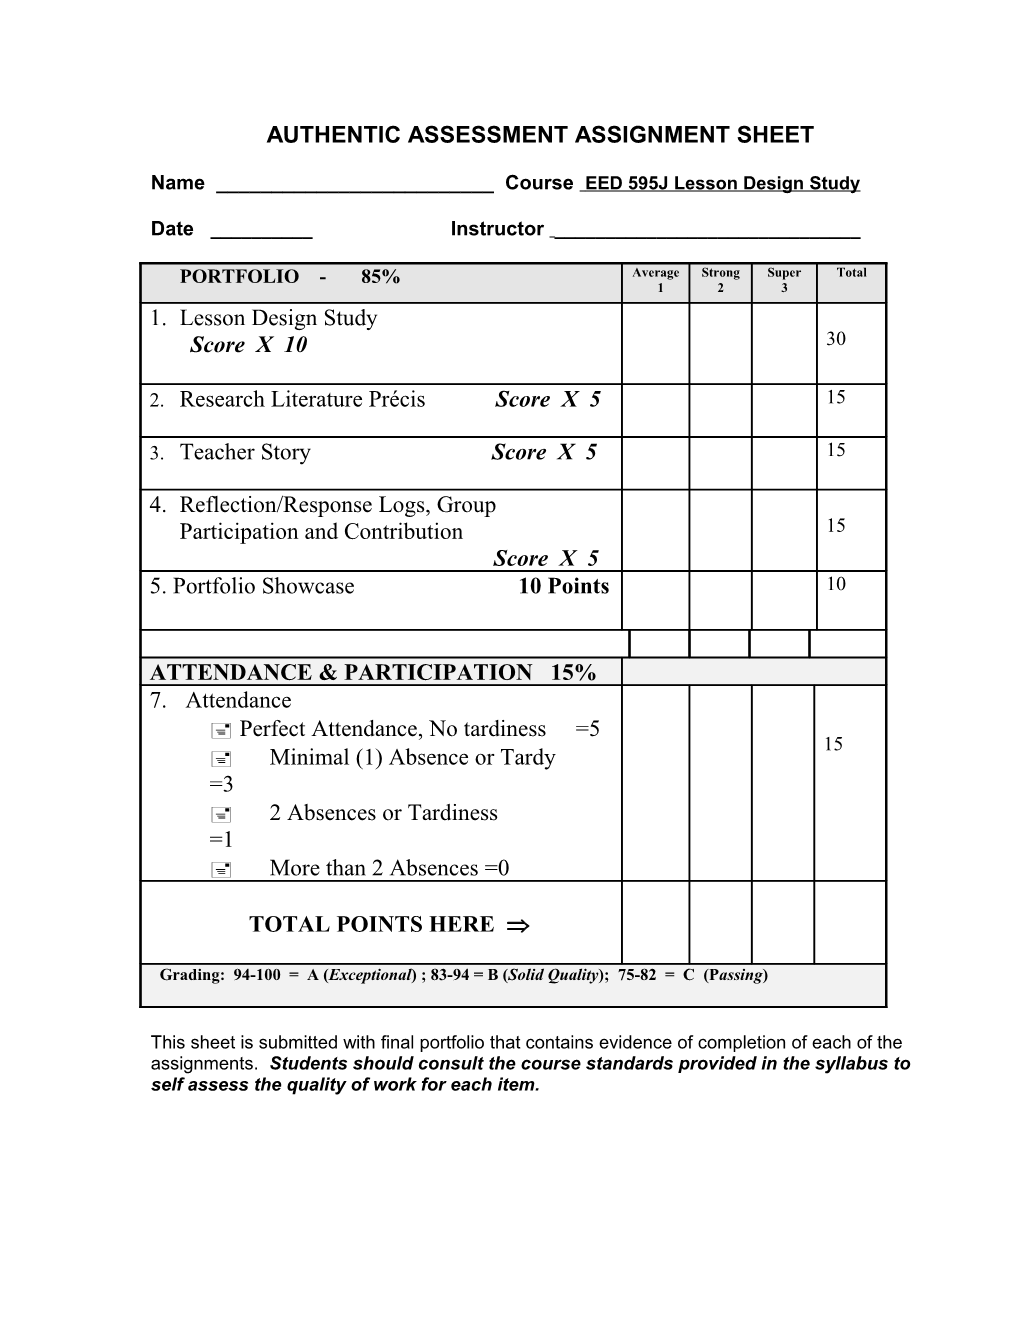 Authentic Assessment Assignment Sheet